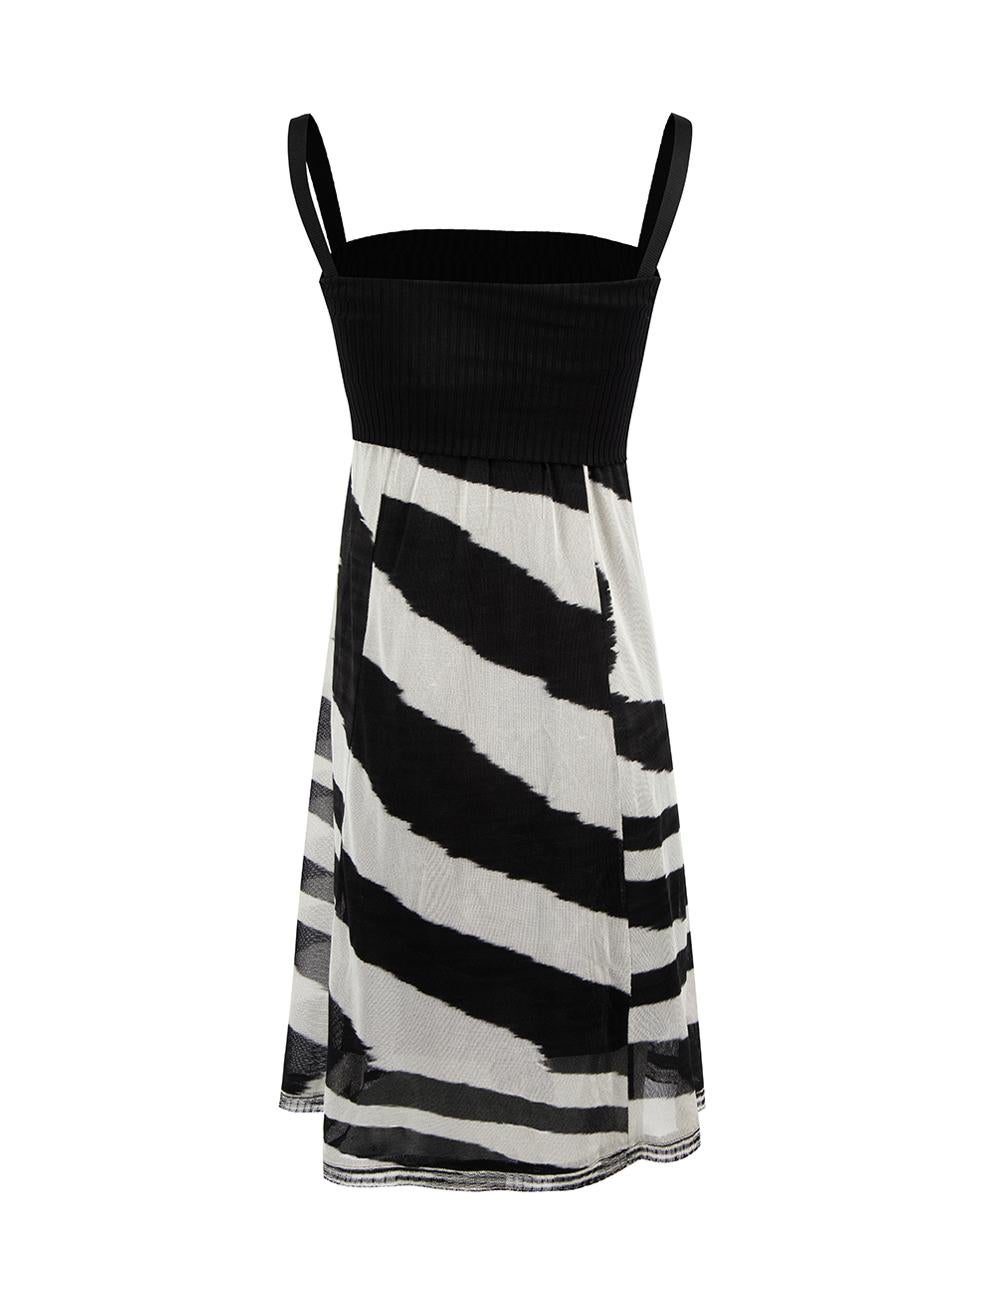 Missoni Strappy Knit Top Zebra Print Dress Size XS In Good Condition For Sale In London, GB